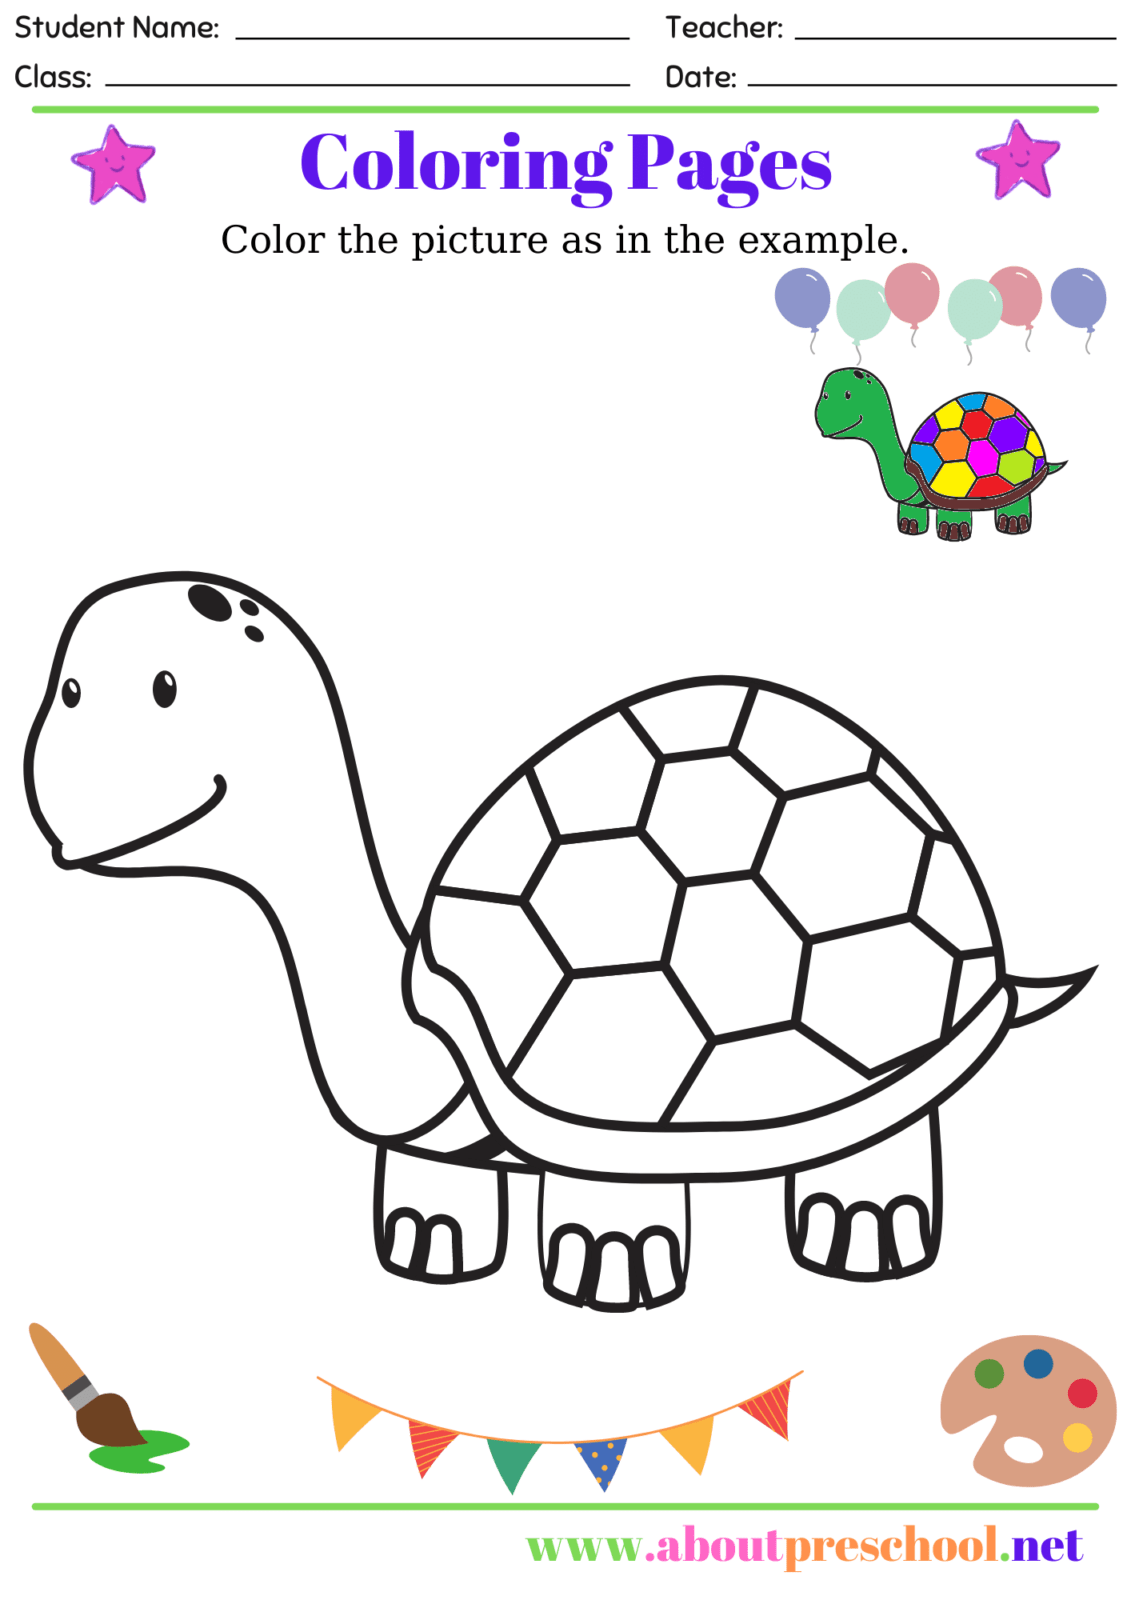 Coloring Pages 4